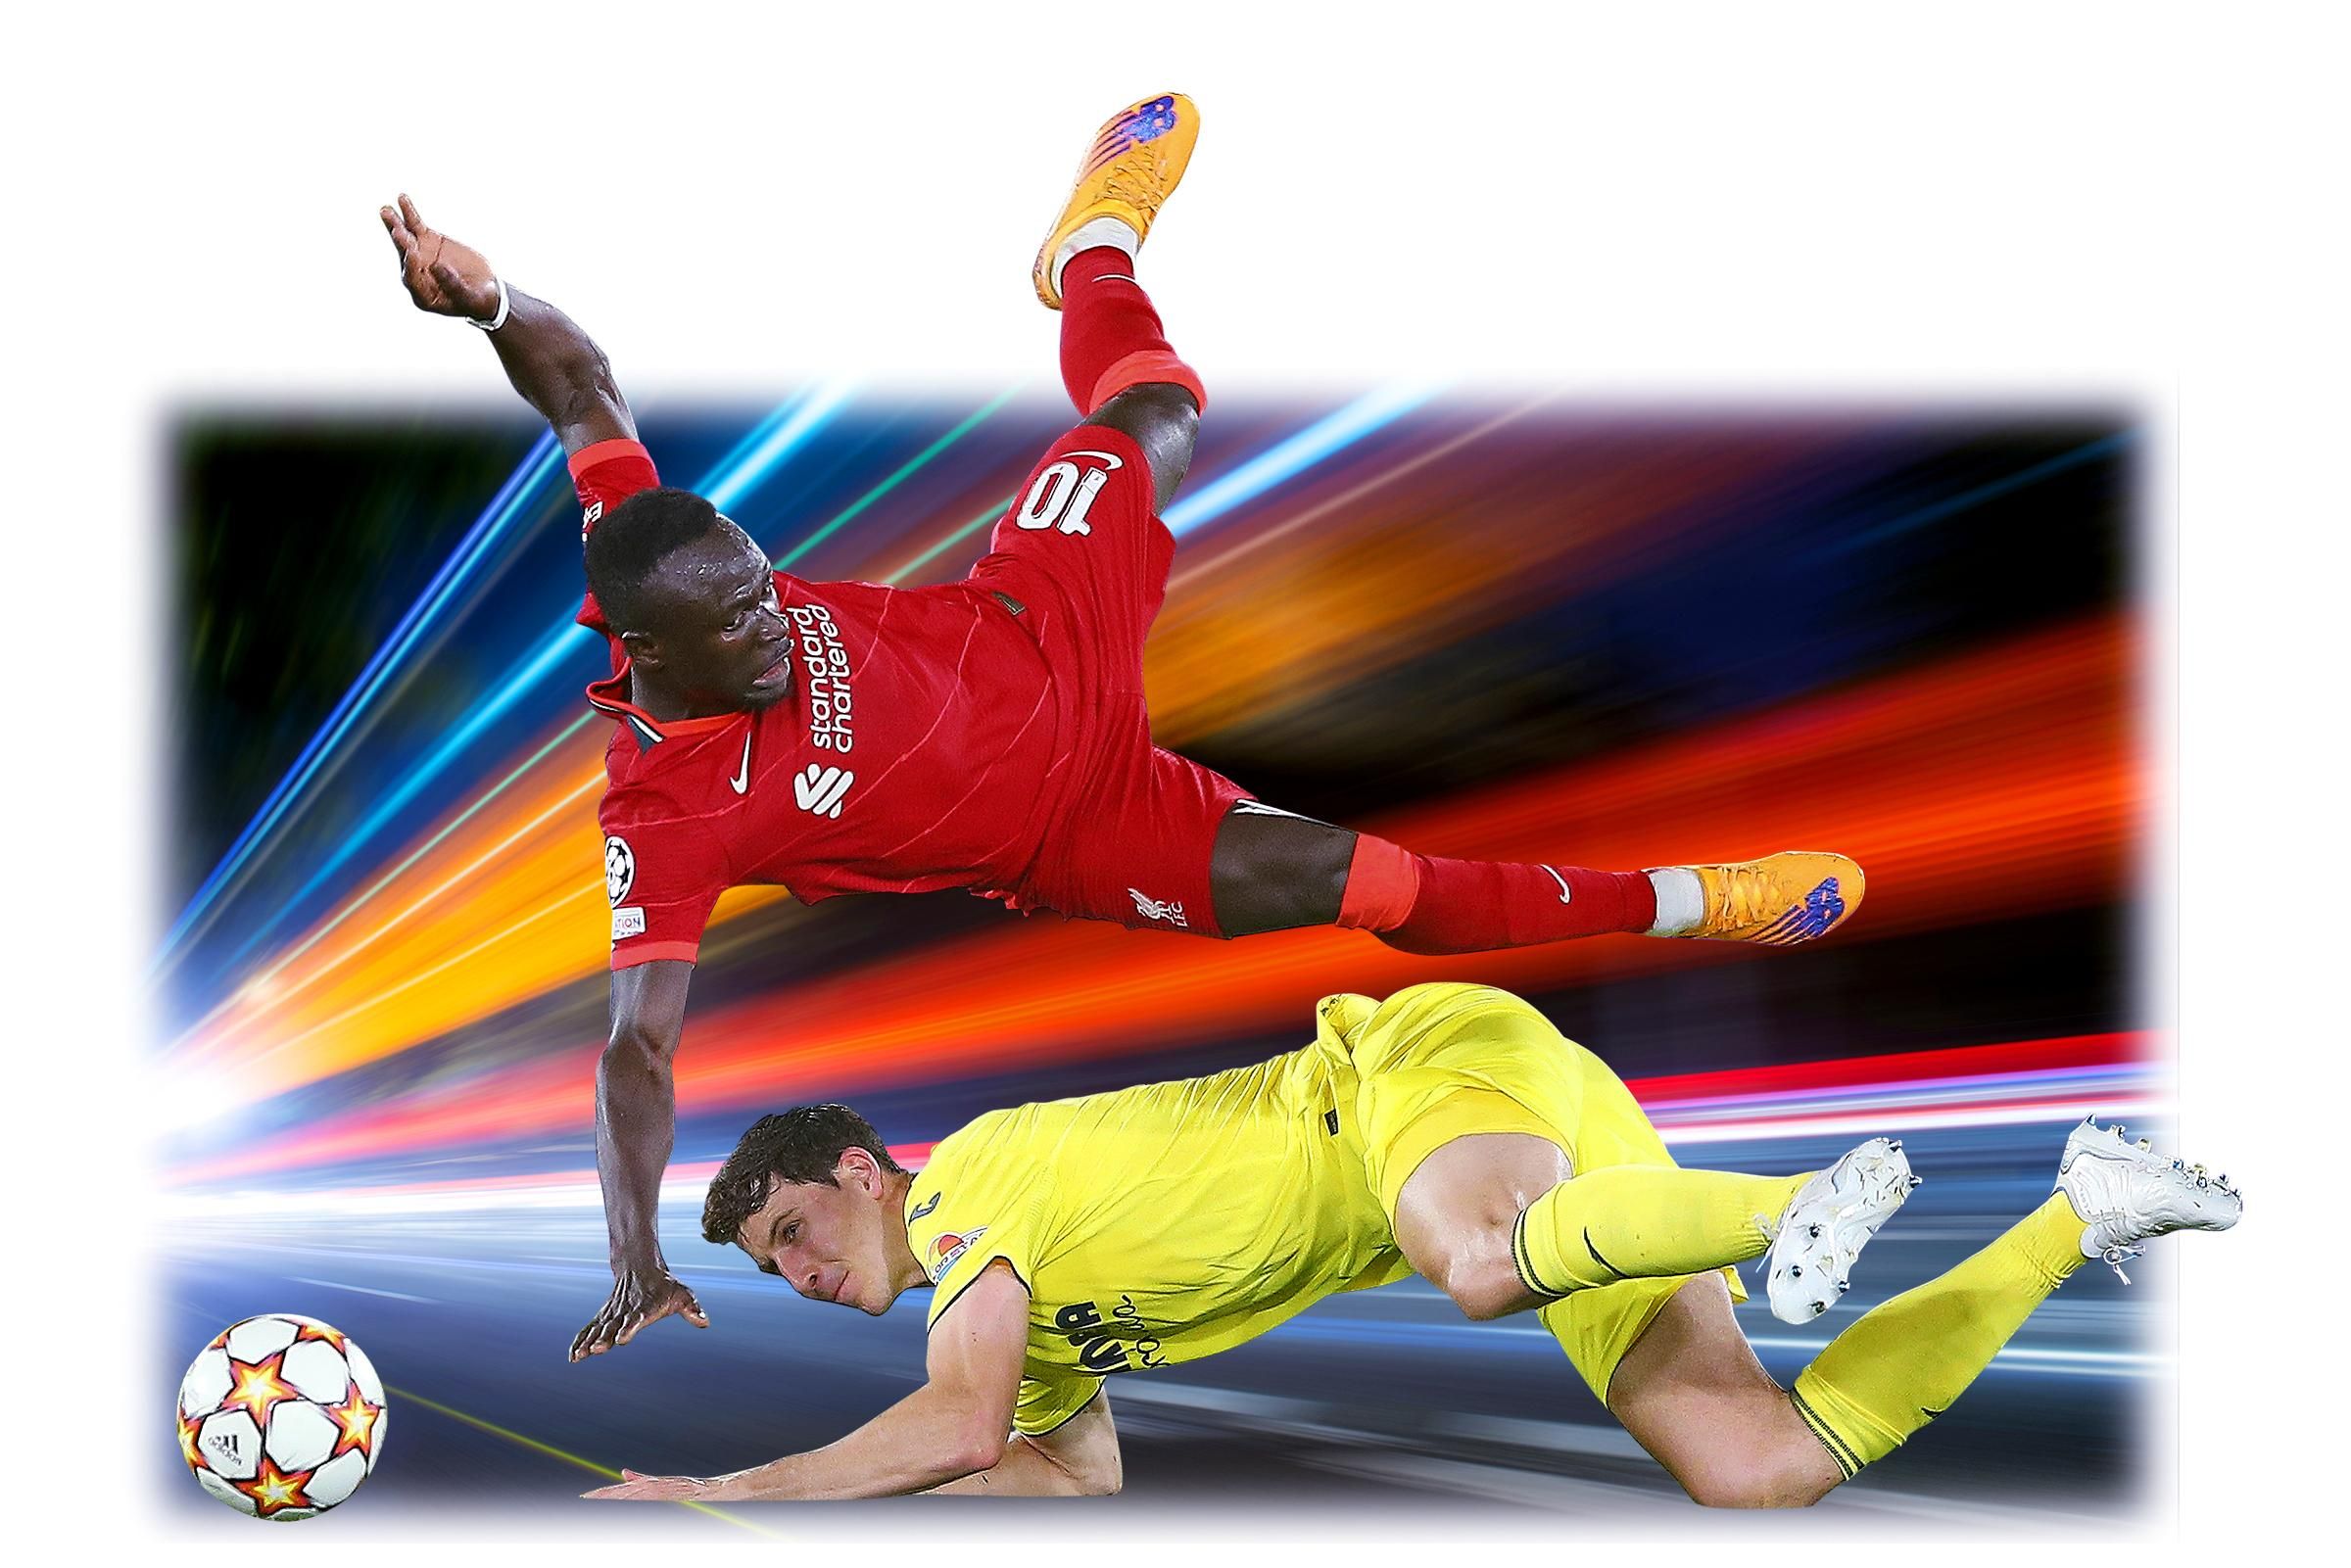 Two soccer players dive for a ball against a multi-colored stylized backdrop in this composite image.